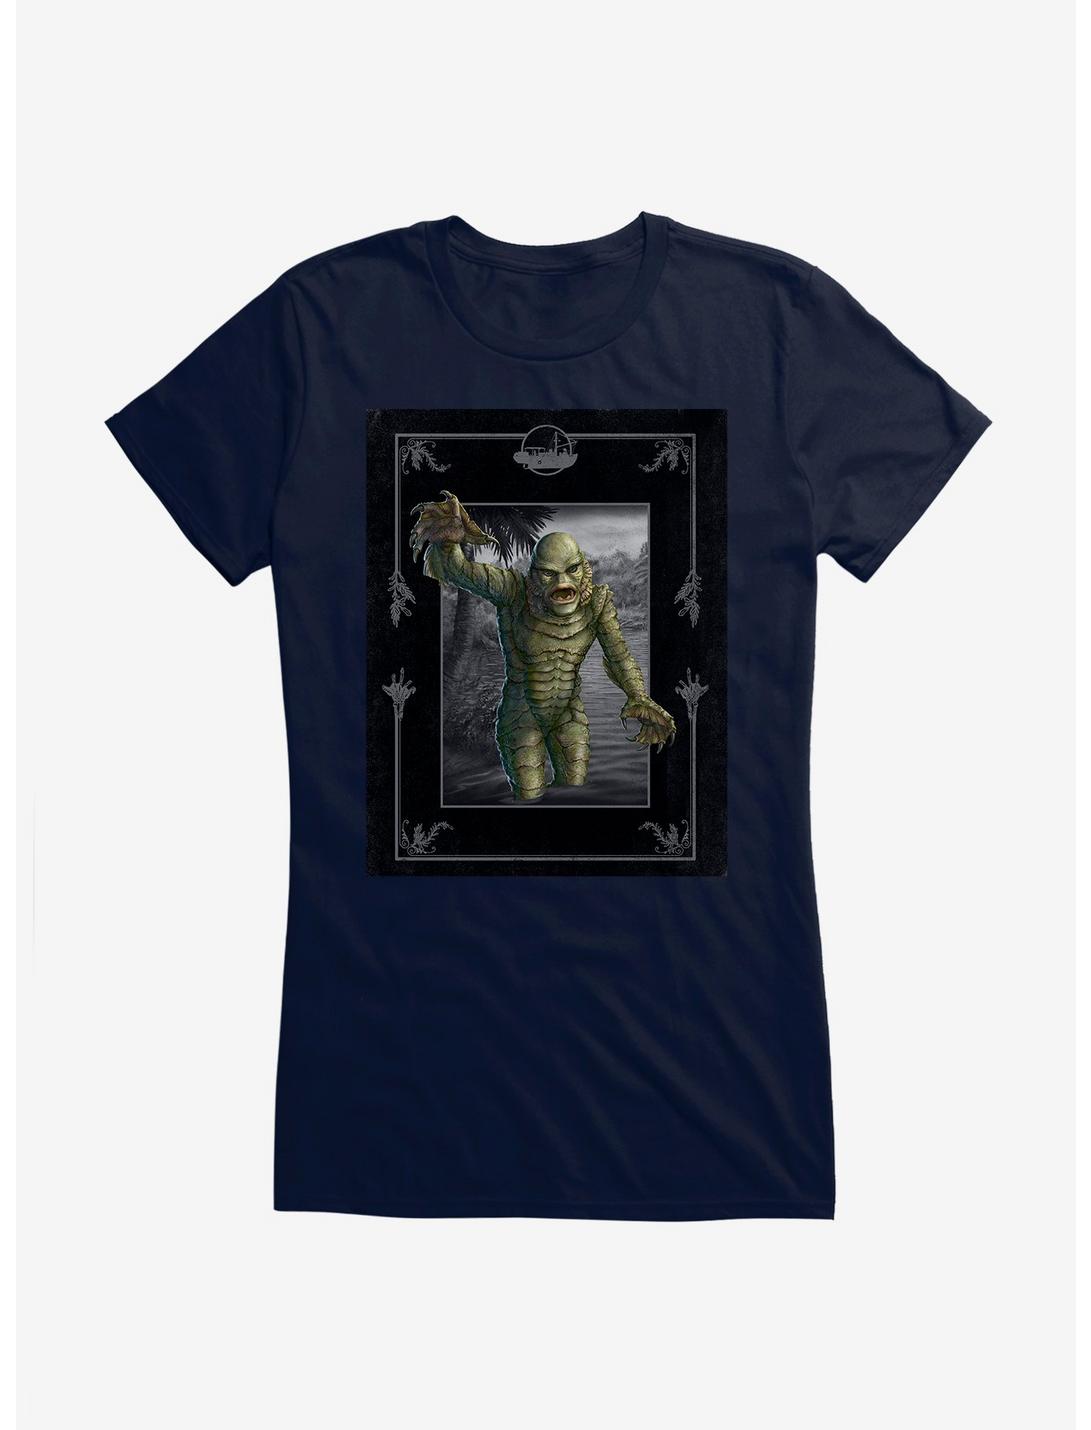 Universal Monsters The Creature From The Black Lagoon Out The Water Girls T-Shirt, , hi-res